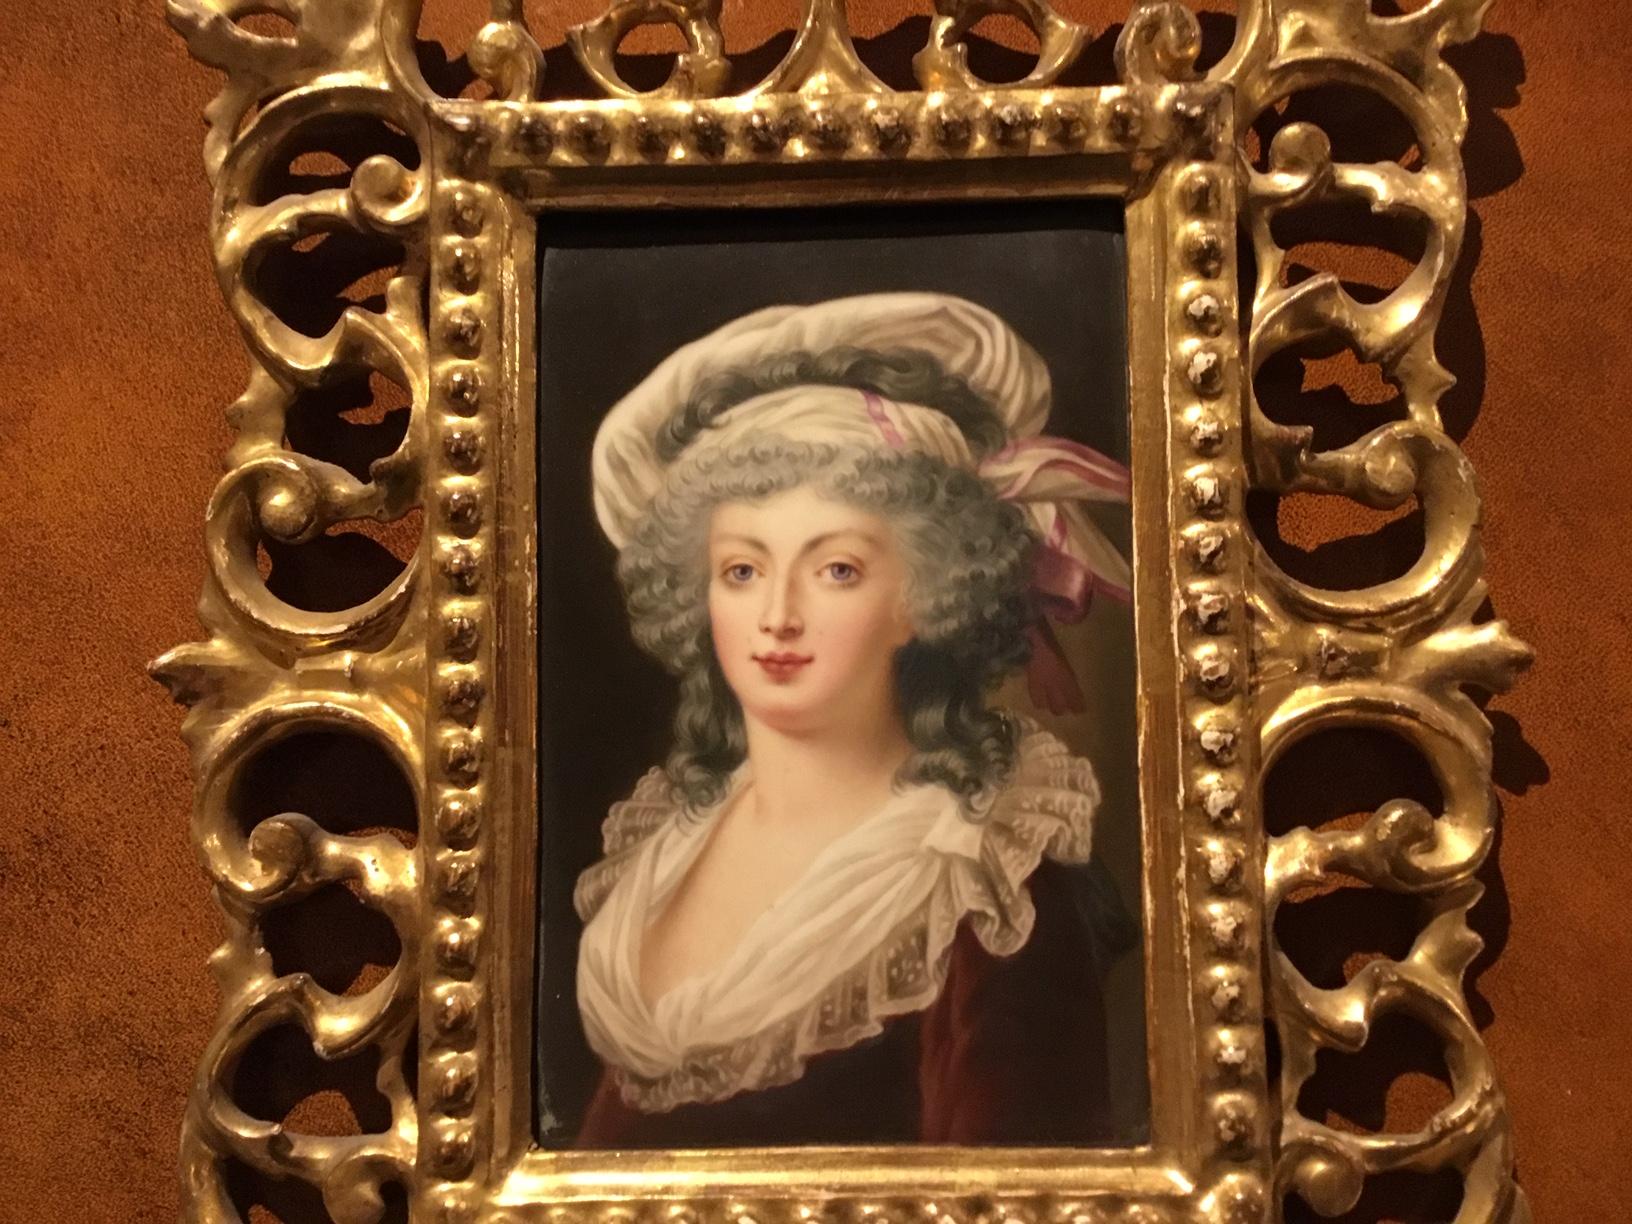 A 19th century porcelain plaque depicting a portrait of an attractive lady, housed within an ornate carved Florentine giltwood frame, Austrian, circa 1880

Dimensions: 8